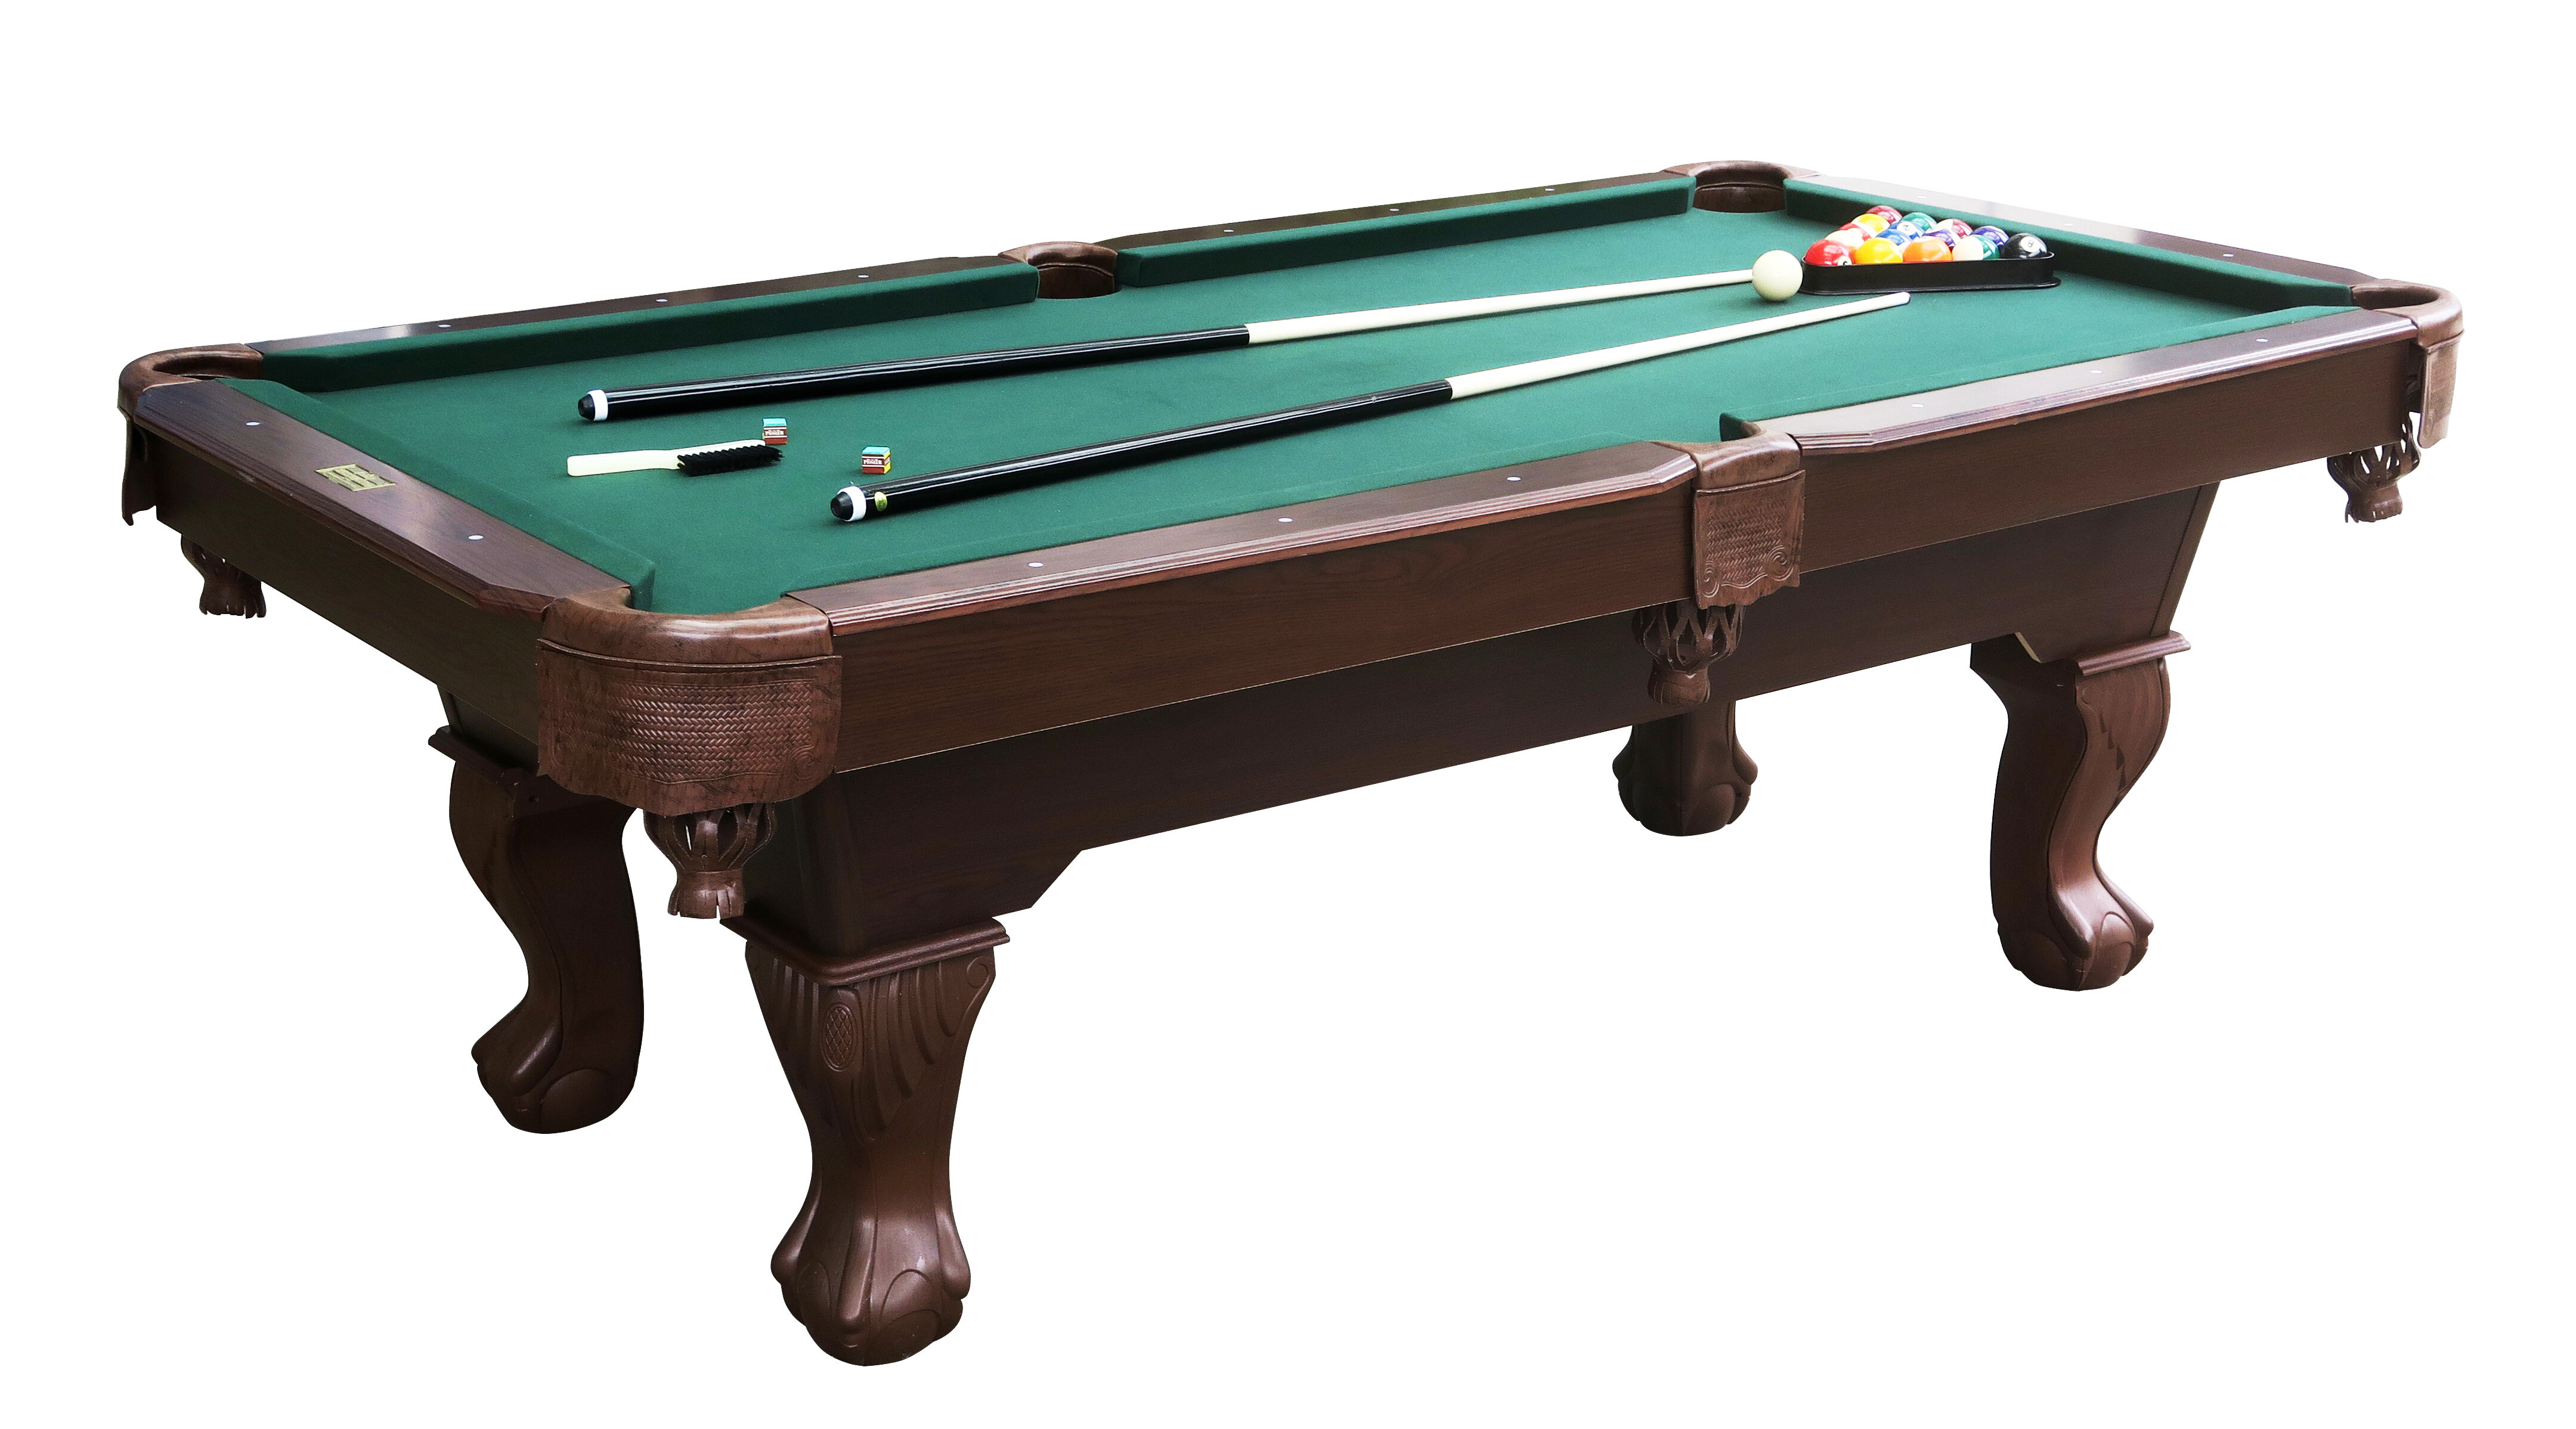 Barrington Springdale 7.5' Pool Table with Playing Accessories, pool table